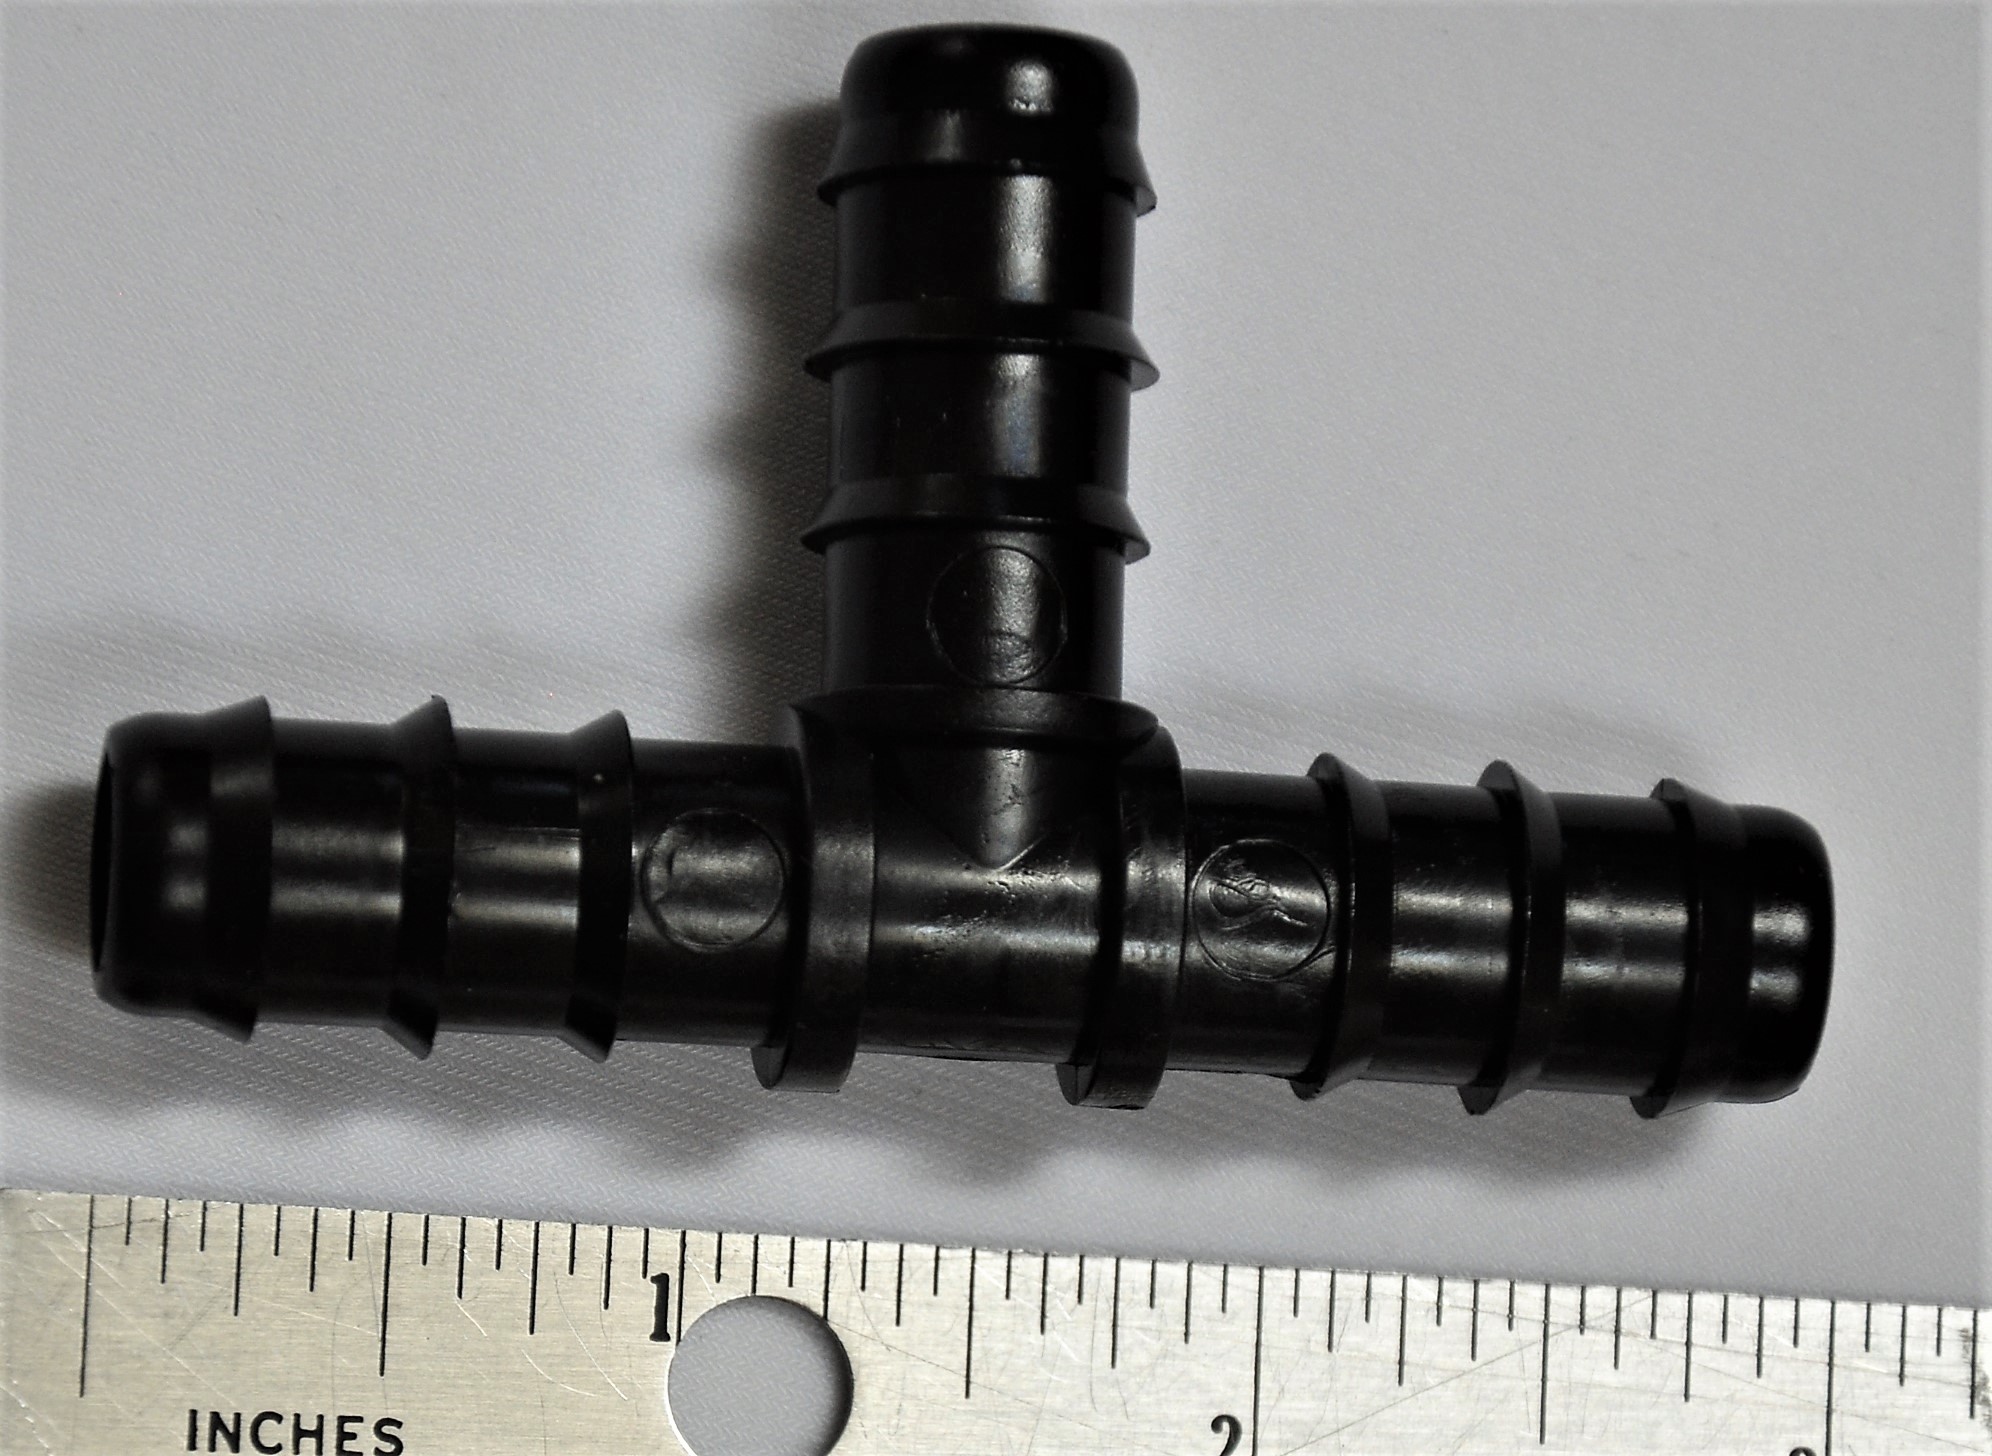 Plastic Tee adapter: multi-barb,1/2 X 1/2X 1/2 for 1/2 13 mm ID tubing Connection